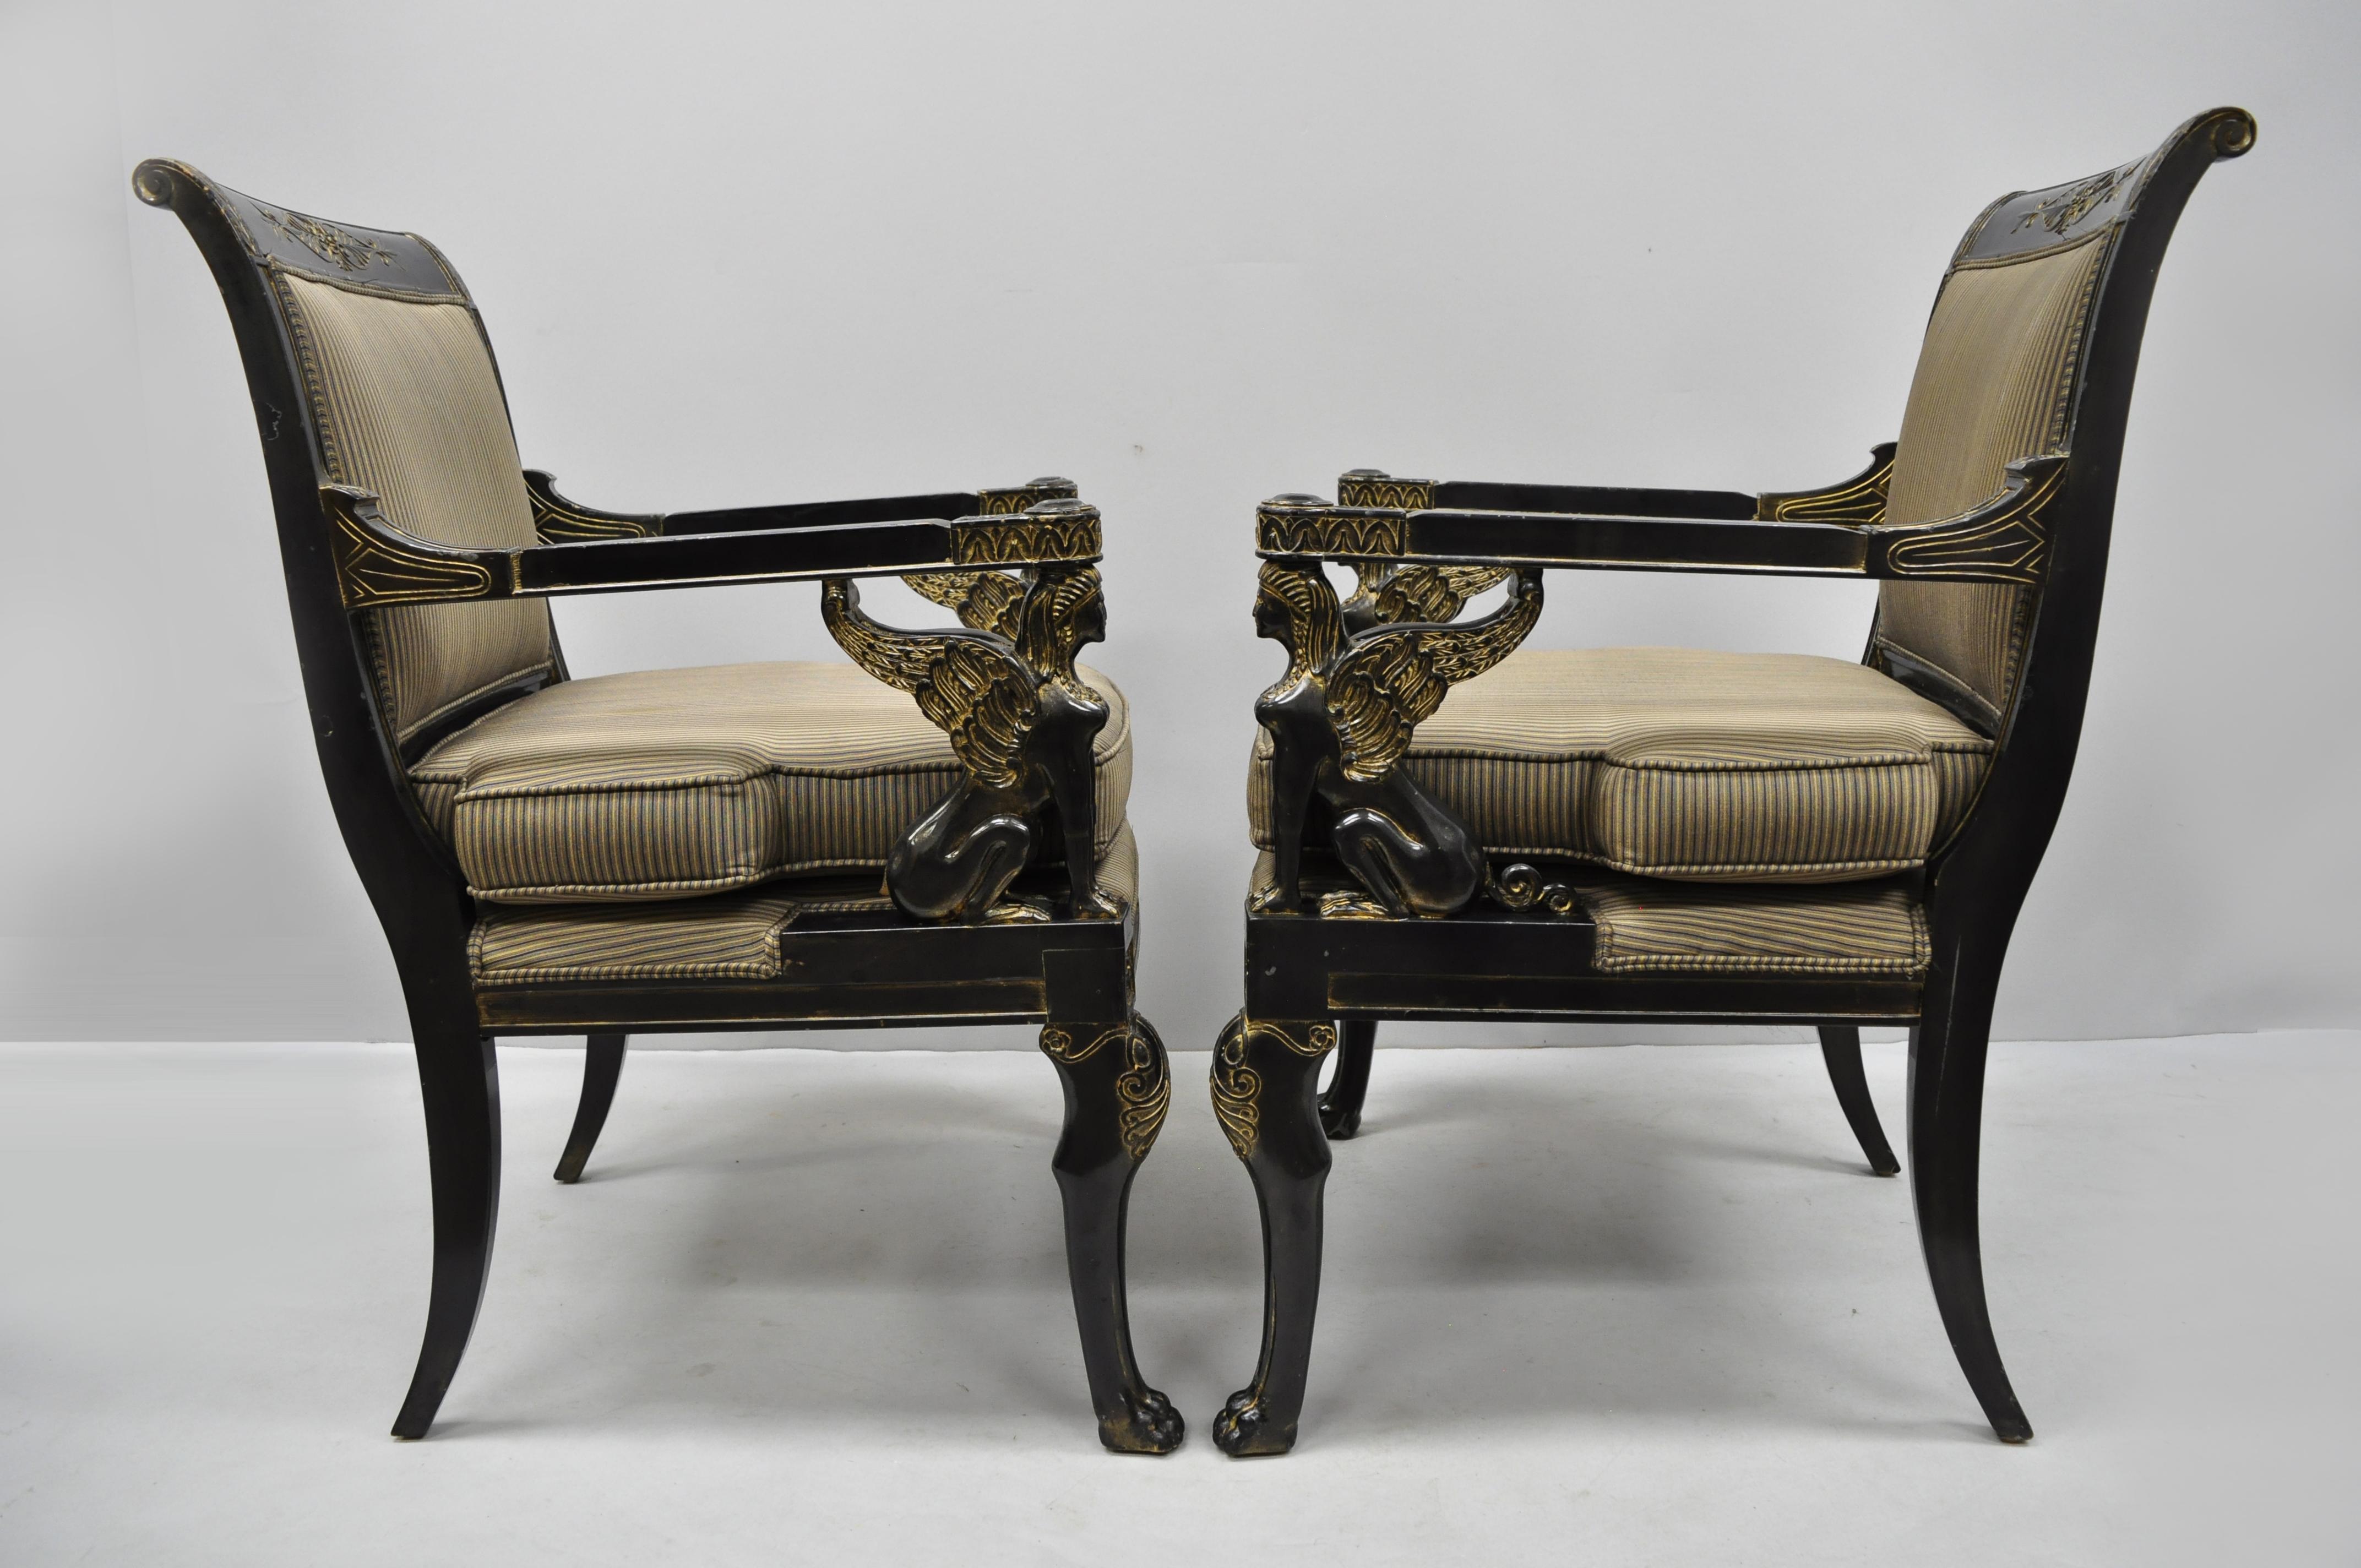 Pair of French Empire Regency style black lacquer chairs with Sphinx figures by Lambert. Items feature carved sphinx figures, paw feet, black lacquer finish, gold accents, solid wood construction, nicely carved details, original label and great